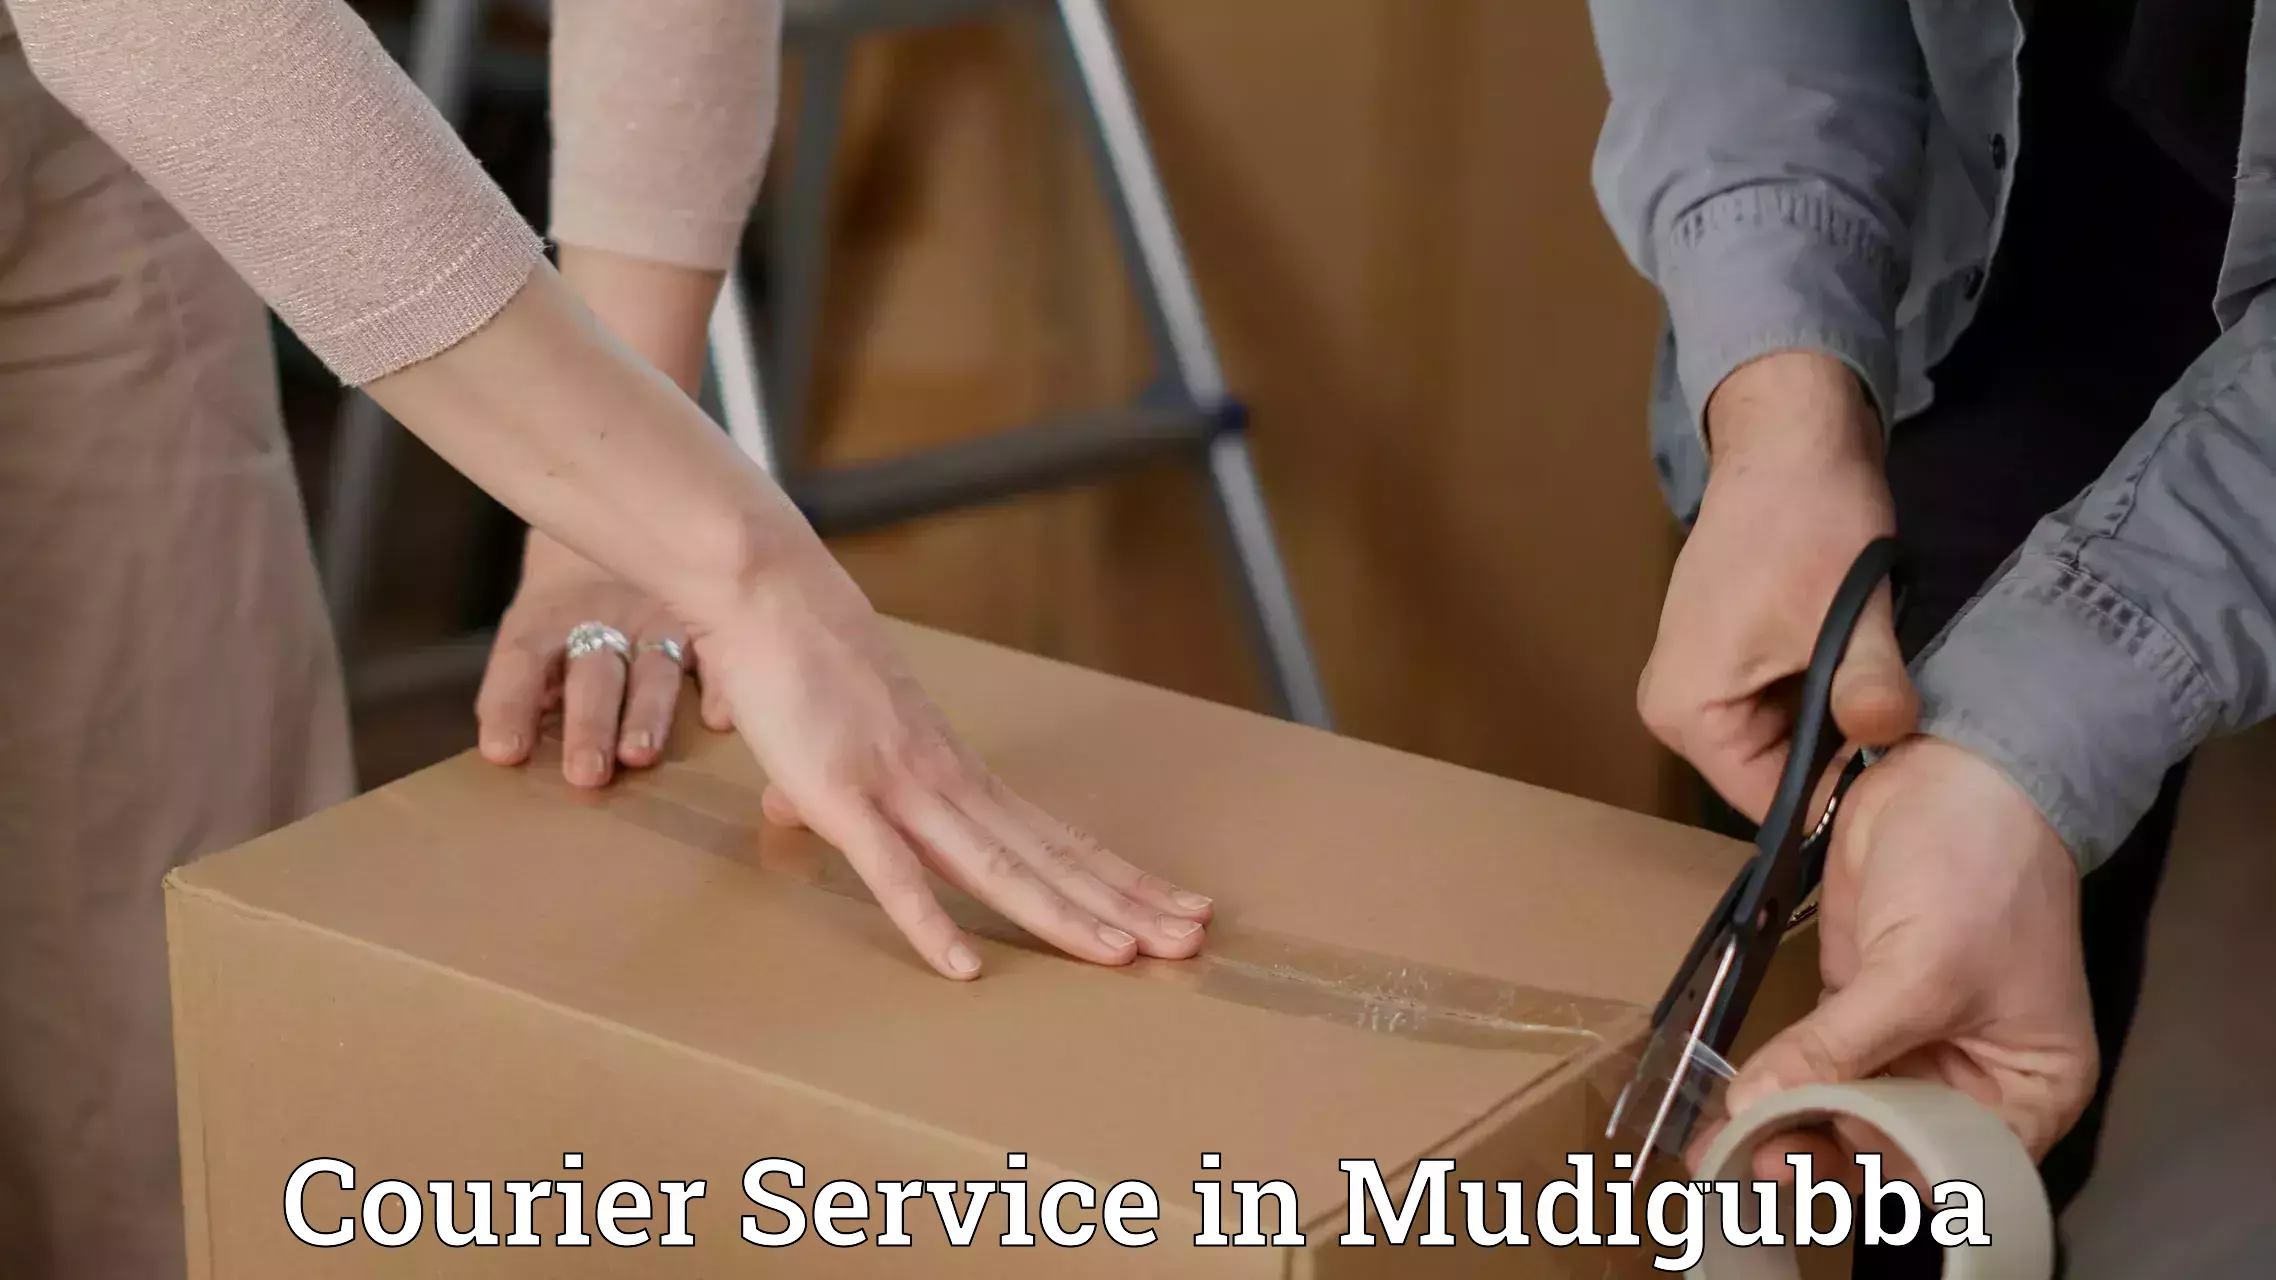 Sustainable courier practices in Mudigubba